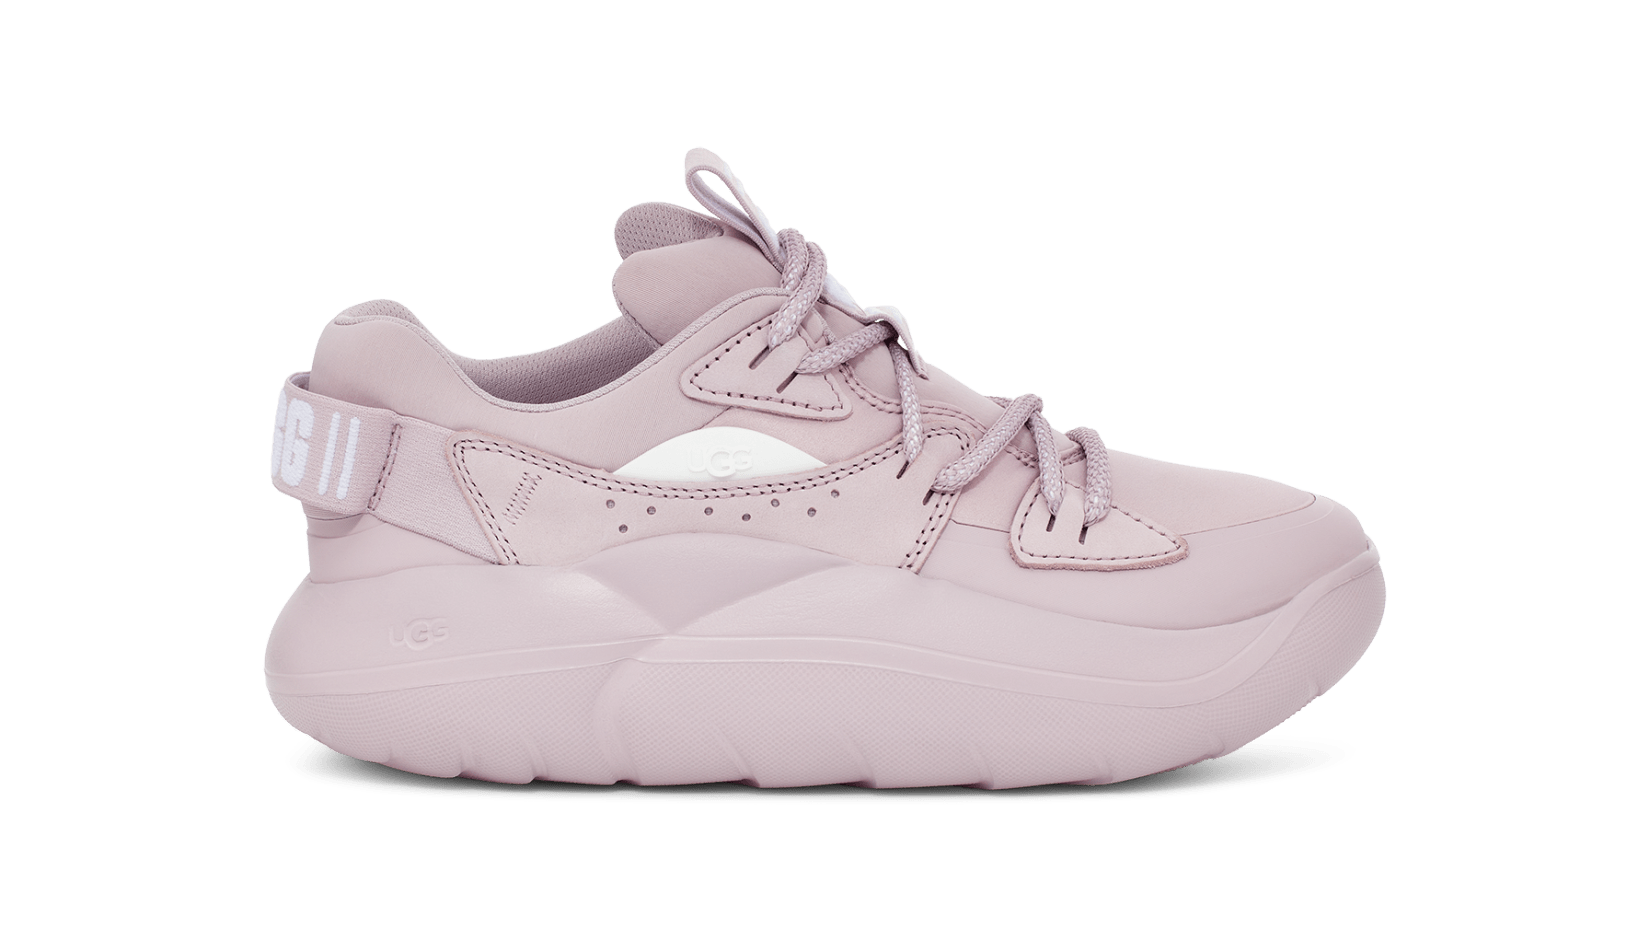 2019 New 2019 Huaraches Ultra Outdoor Shoes Women Sneakers White